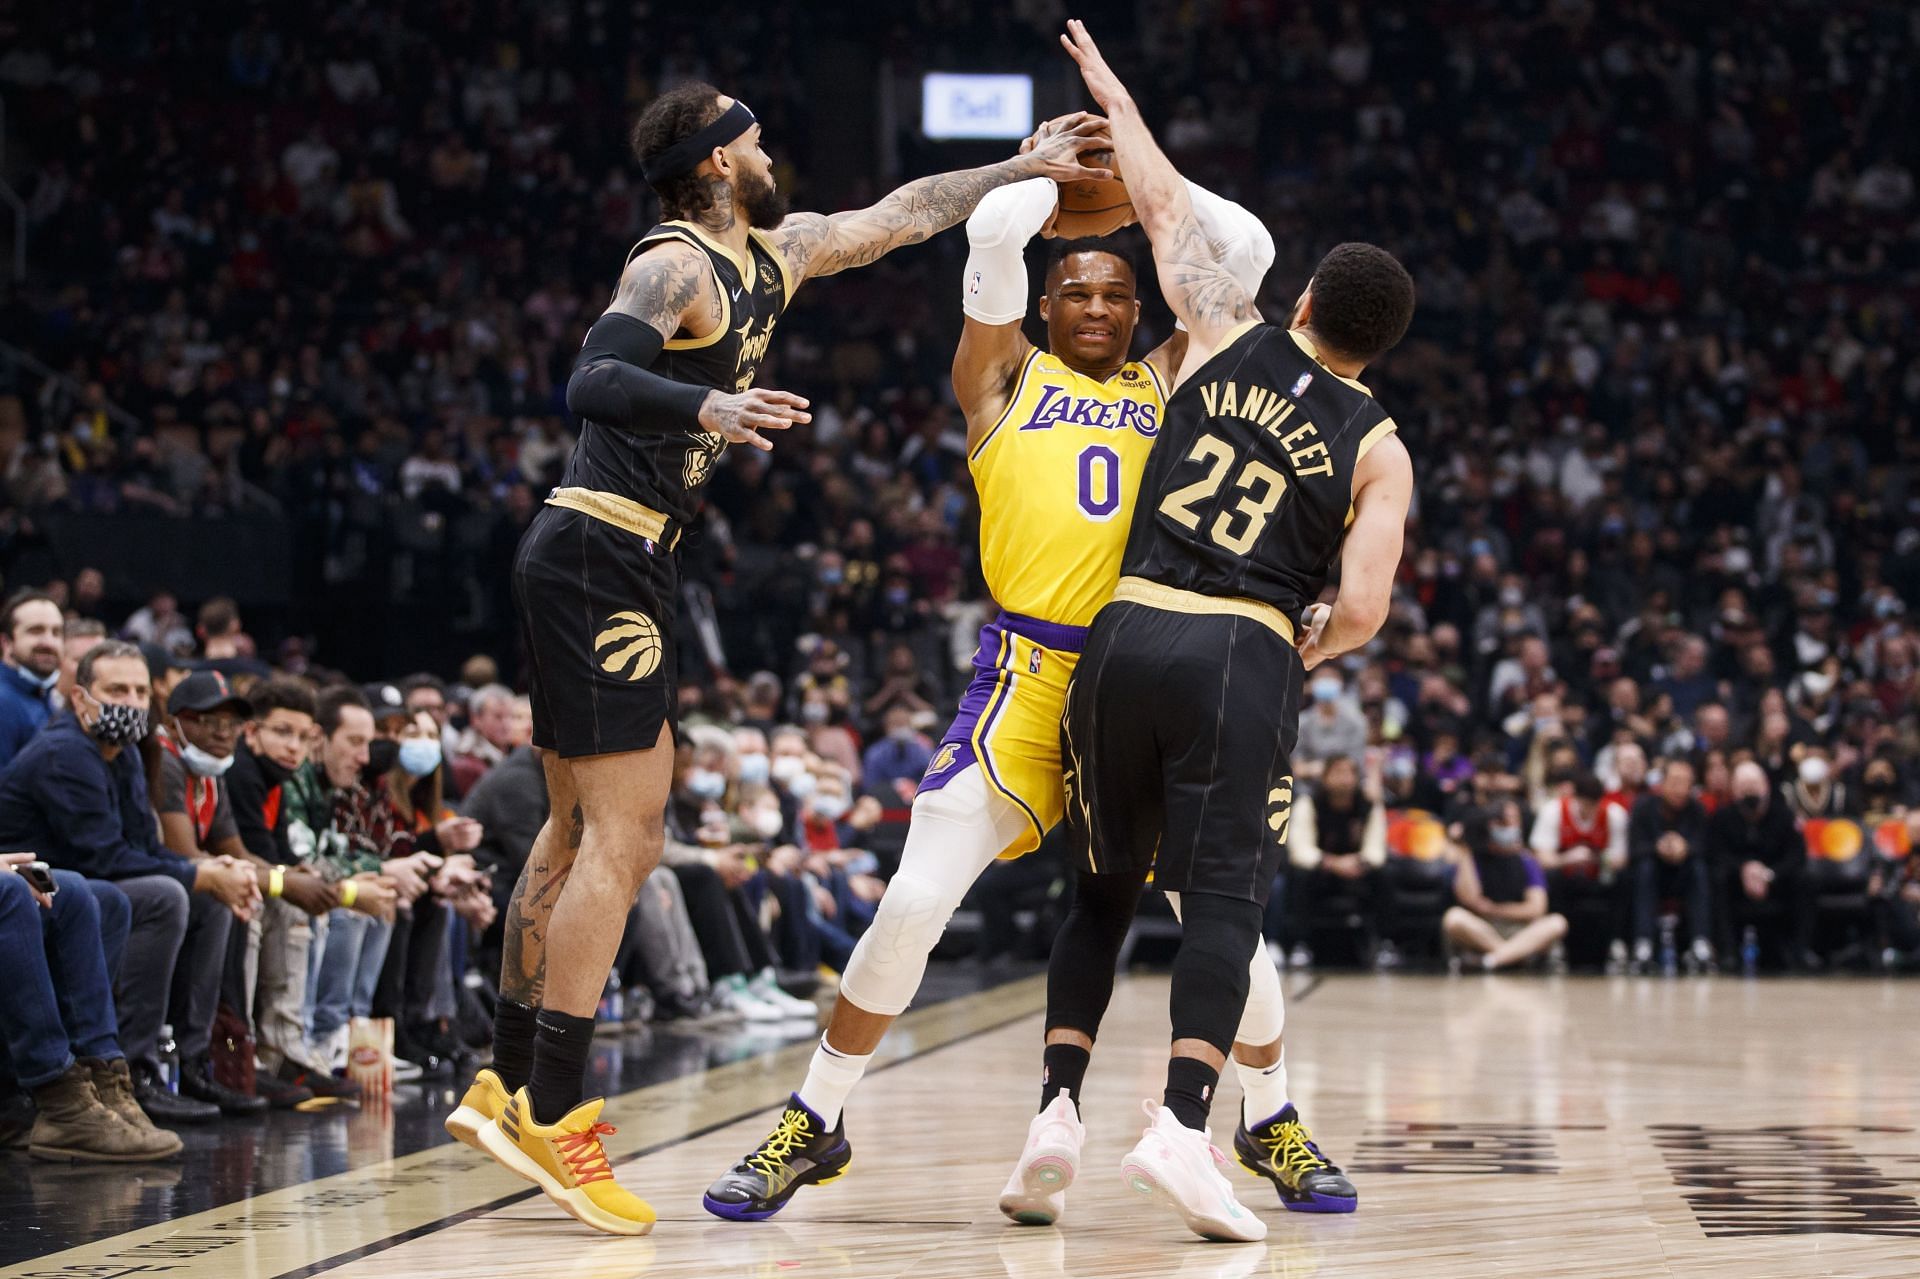 Russell Westbrook #0 of the Los Angeles Lakers is defended by Gary Trent Jr. #33 and Fred VanVleet #23 of the Toronto Raptors